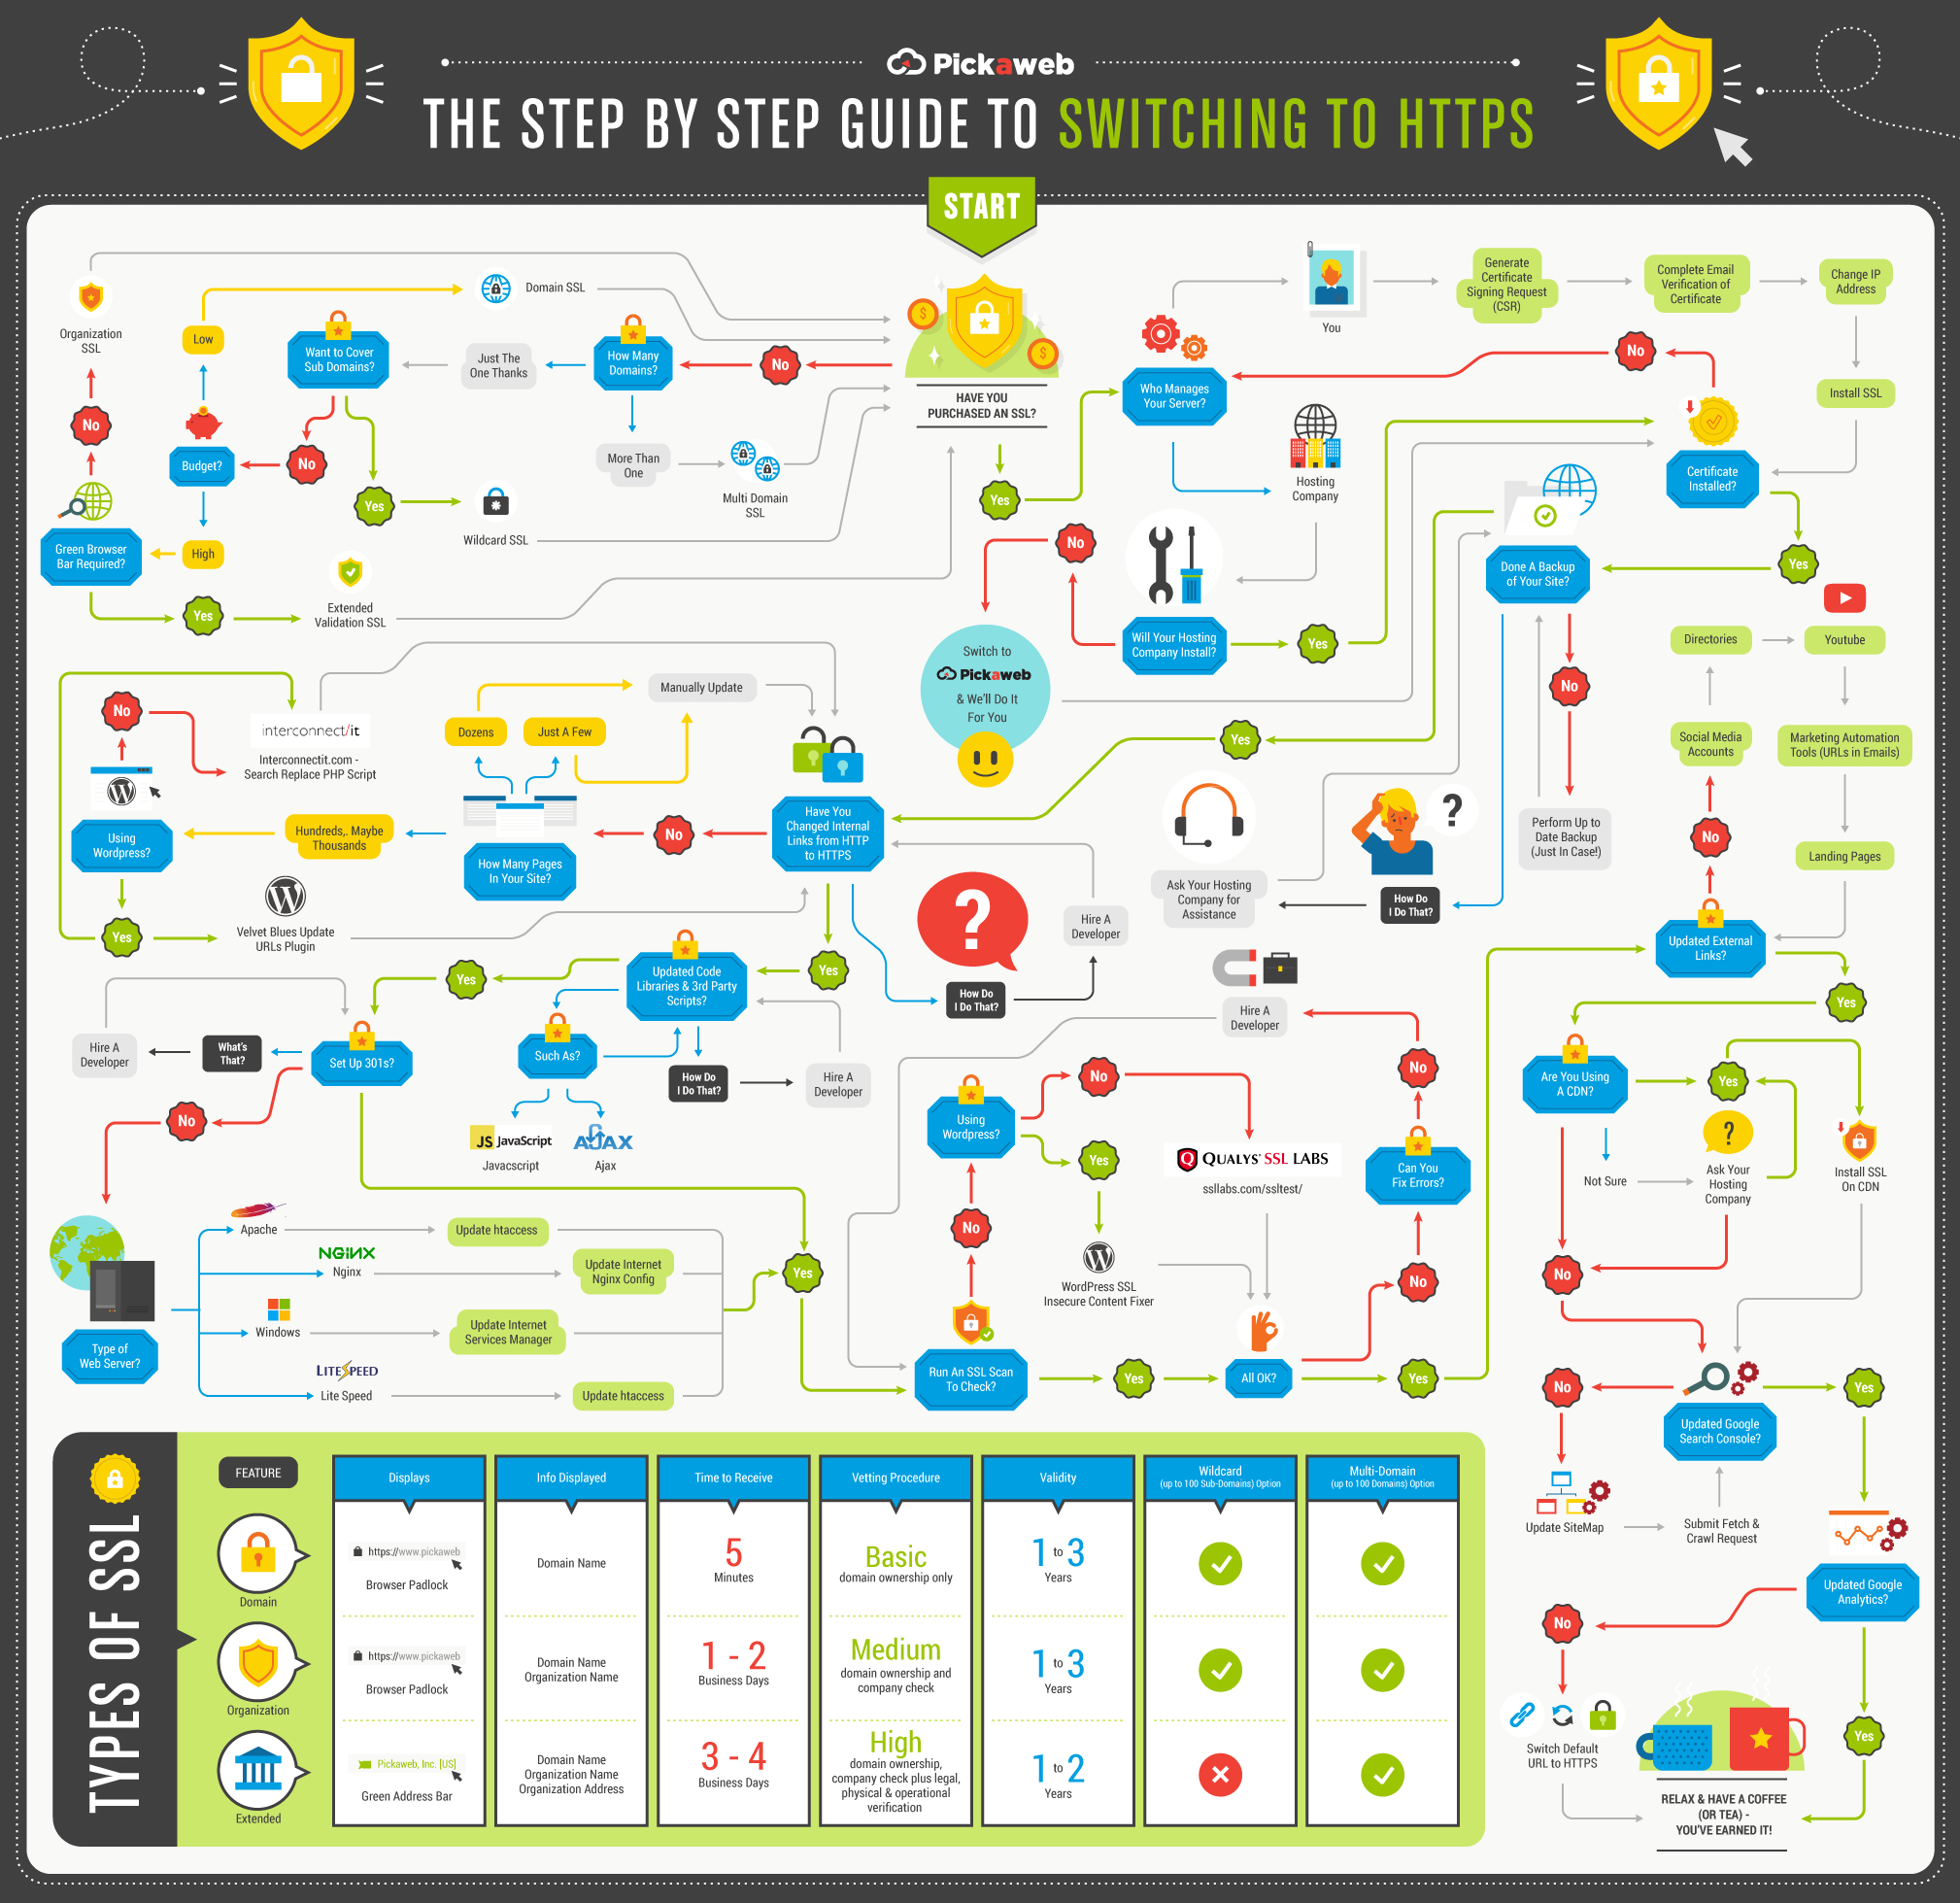 How To Switch Your Website To HTTPS - An Infographic from Pickaweb